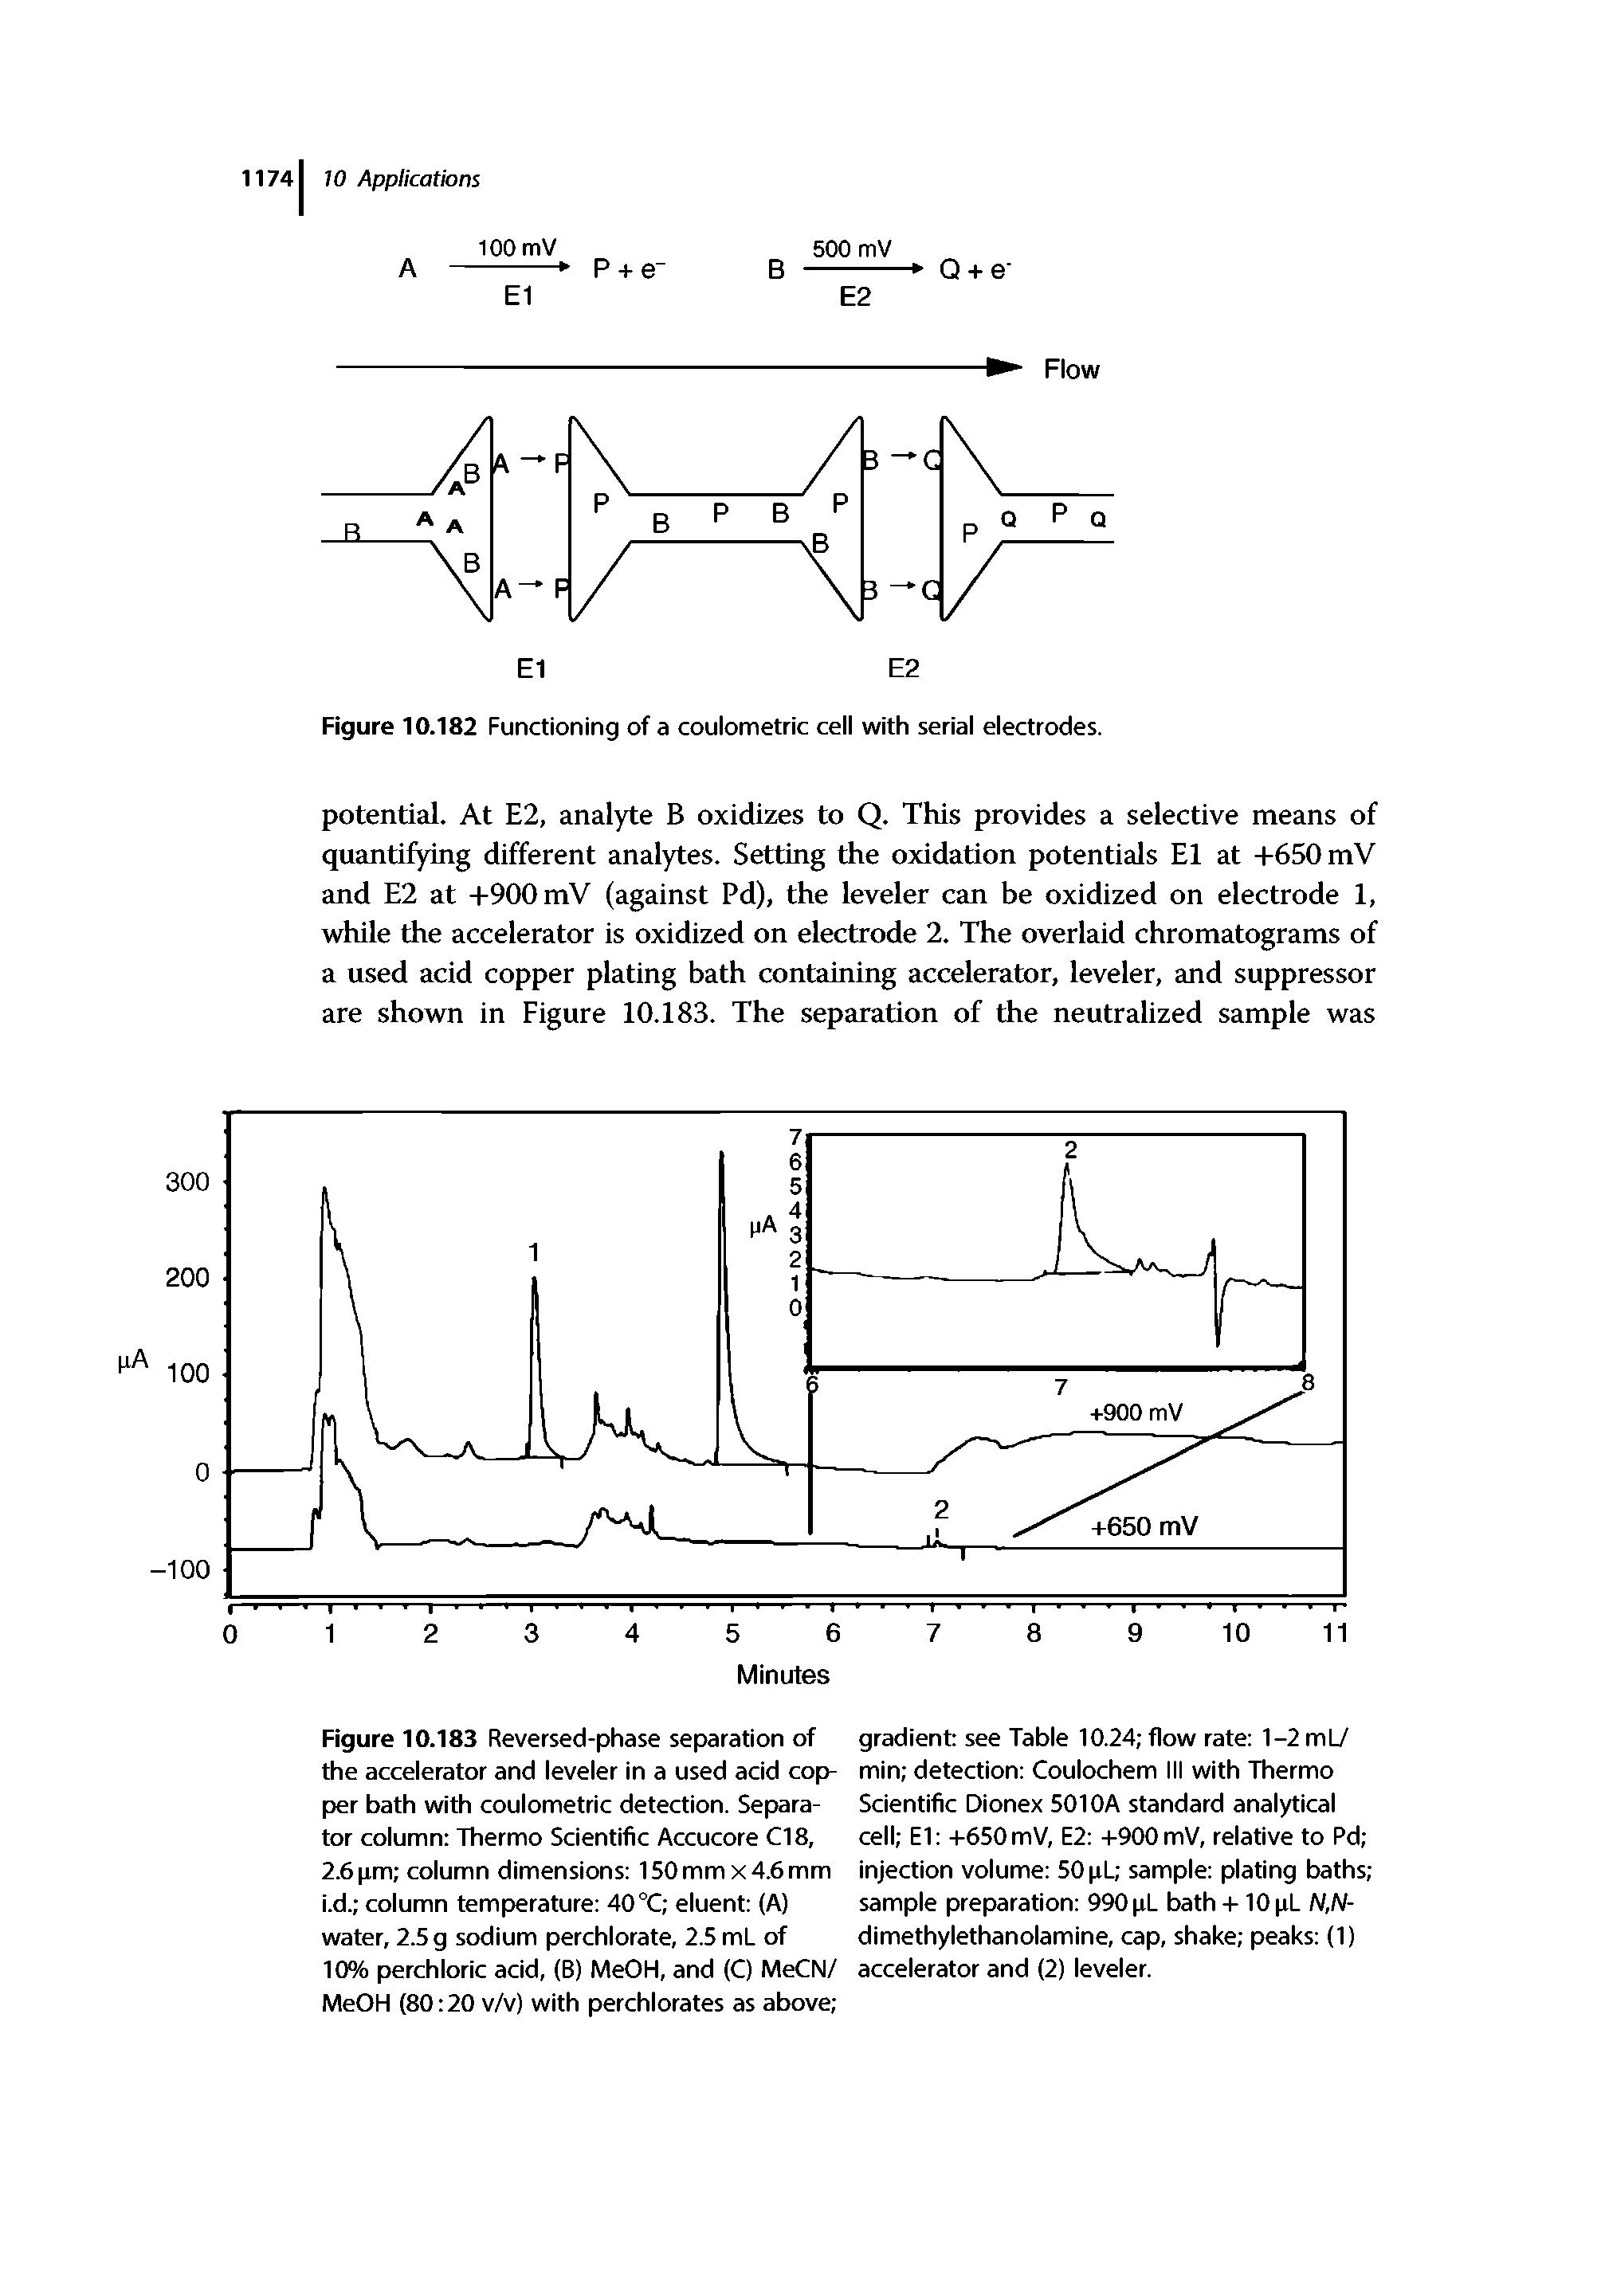 Figure 10.183 Reversed-phase separation of the accelerator and leveler in a used acid copper bath with coulometric detection. Separator column Thermo Scientific Accucore Cl 8, 2.6 (im column dimensions 150 mm x 4.6 mm i.d. column temperature 40 °C eluent (A) water, 2.5 g sodium perchlorate, 2.5 mt of 10% perchloric acid, (B) MeOH, and (C) MeCN/ MeOH (80 20 v/v) with perchlorates as above ...